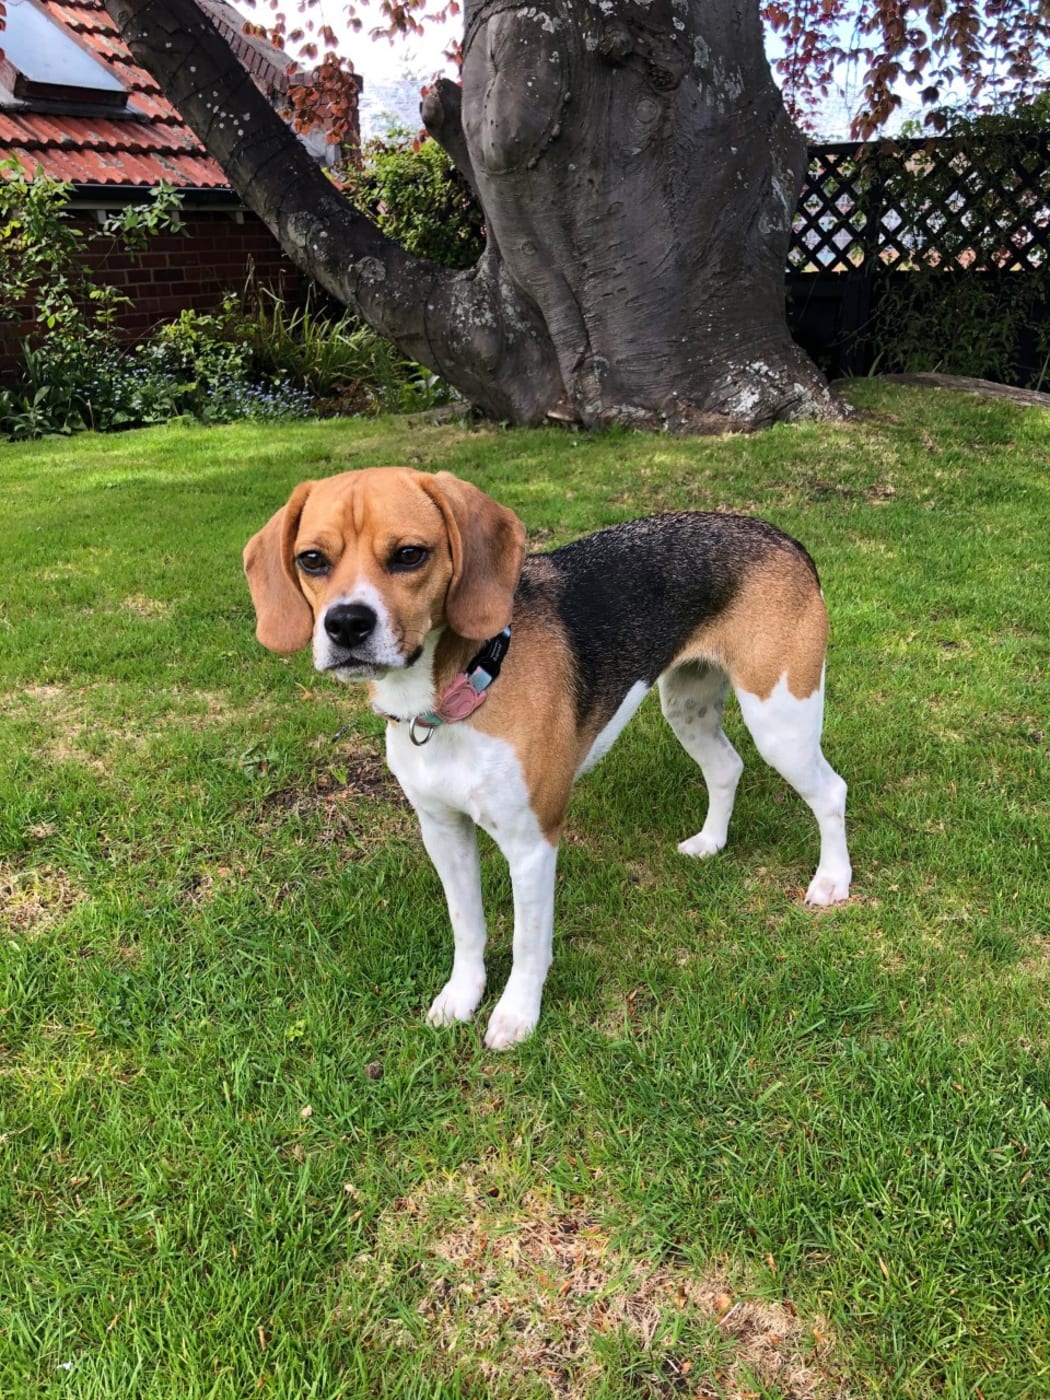 Bean the beagle, who turned out not to be purebred.